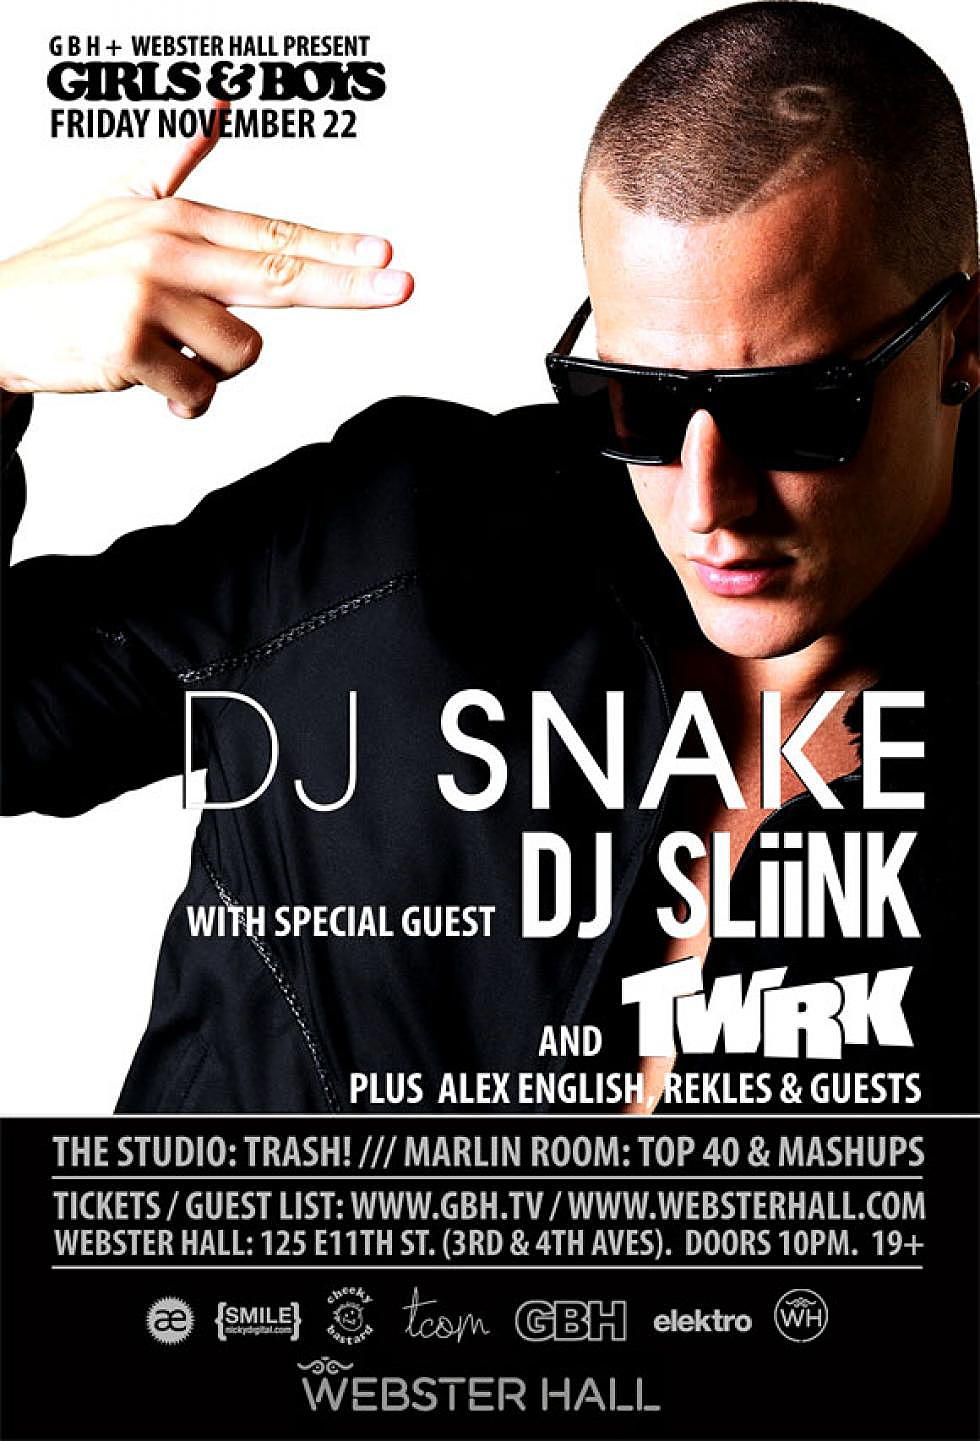 Make a #TurnDownForWhat Vine or Instavideo for the chance to win 2 spots on DJ Snake&#8217;s guest list for his show @ Webster Hall, Friday 11/22!